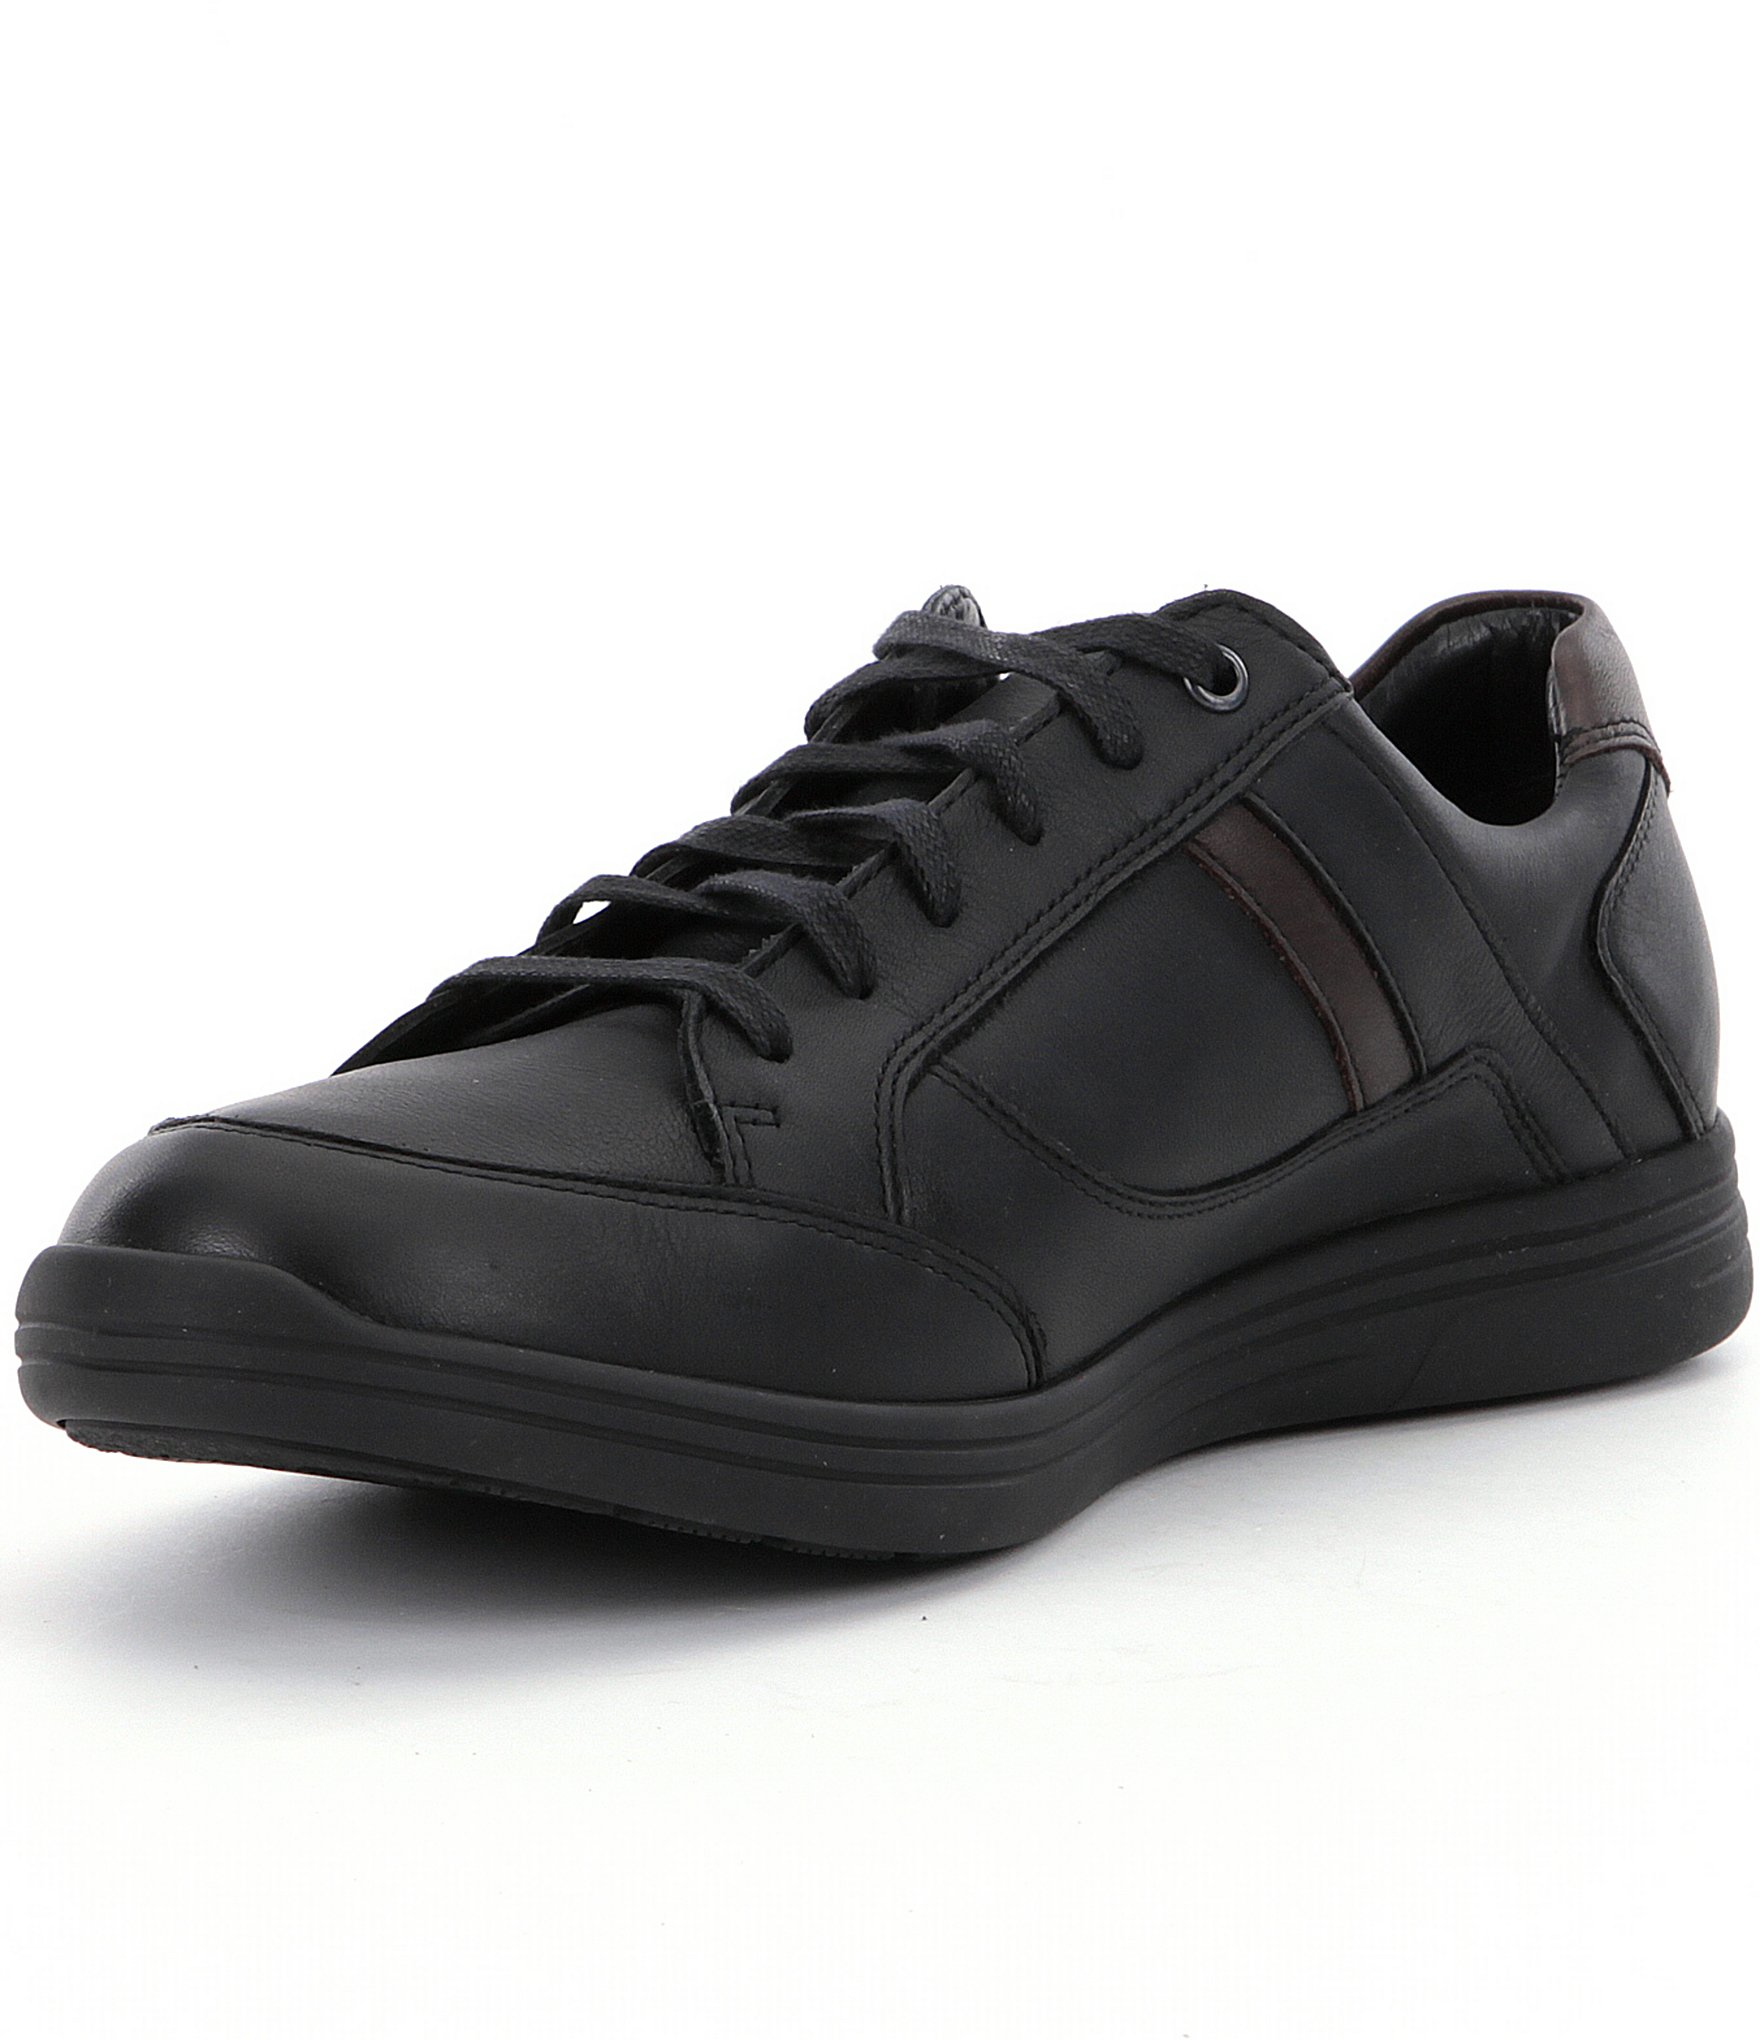 Lyst - Mephisto Men ́s Frank Leather Sneakers in Black for Men